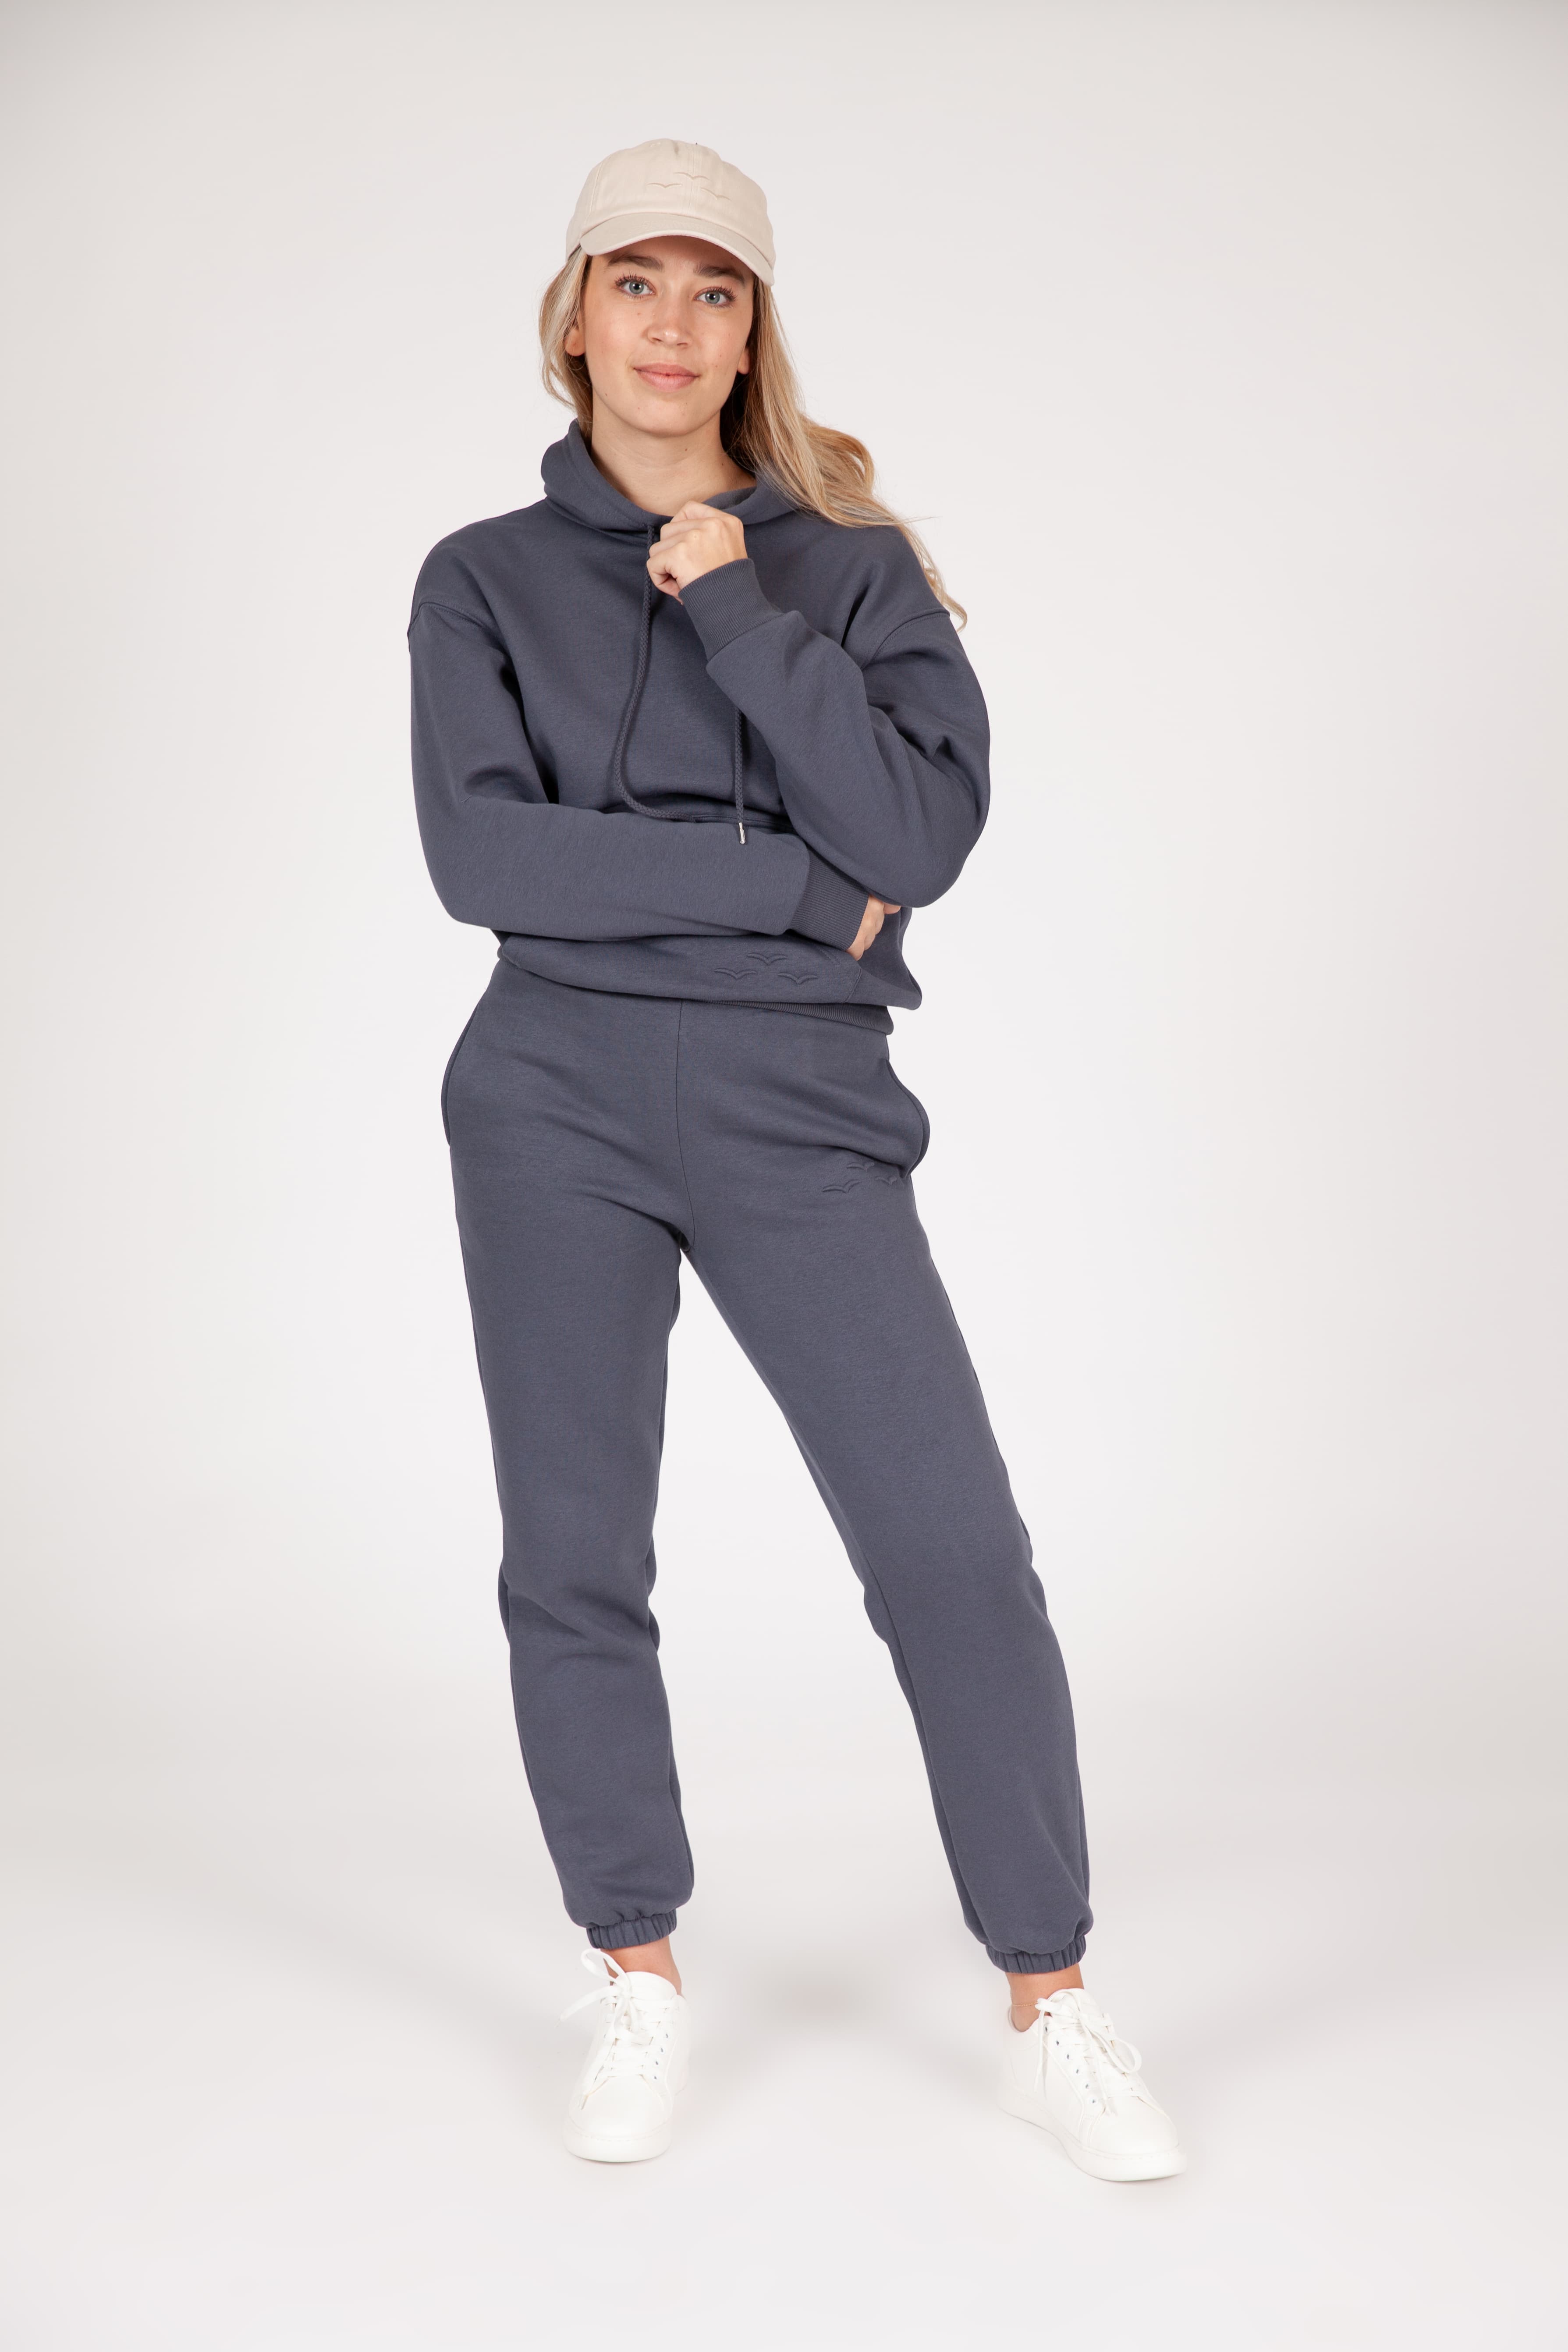 tracksuit in navy - Lazypants